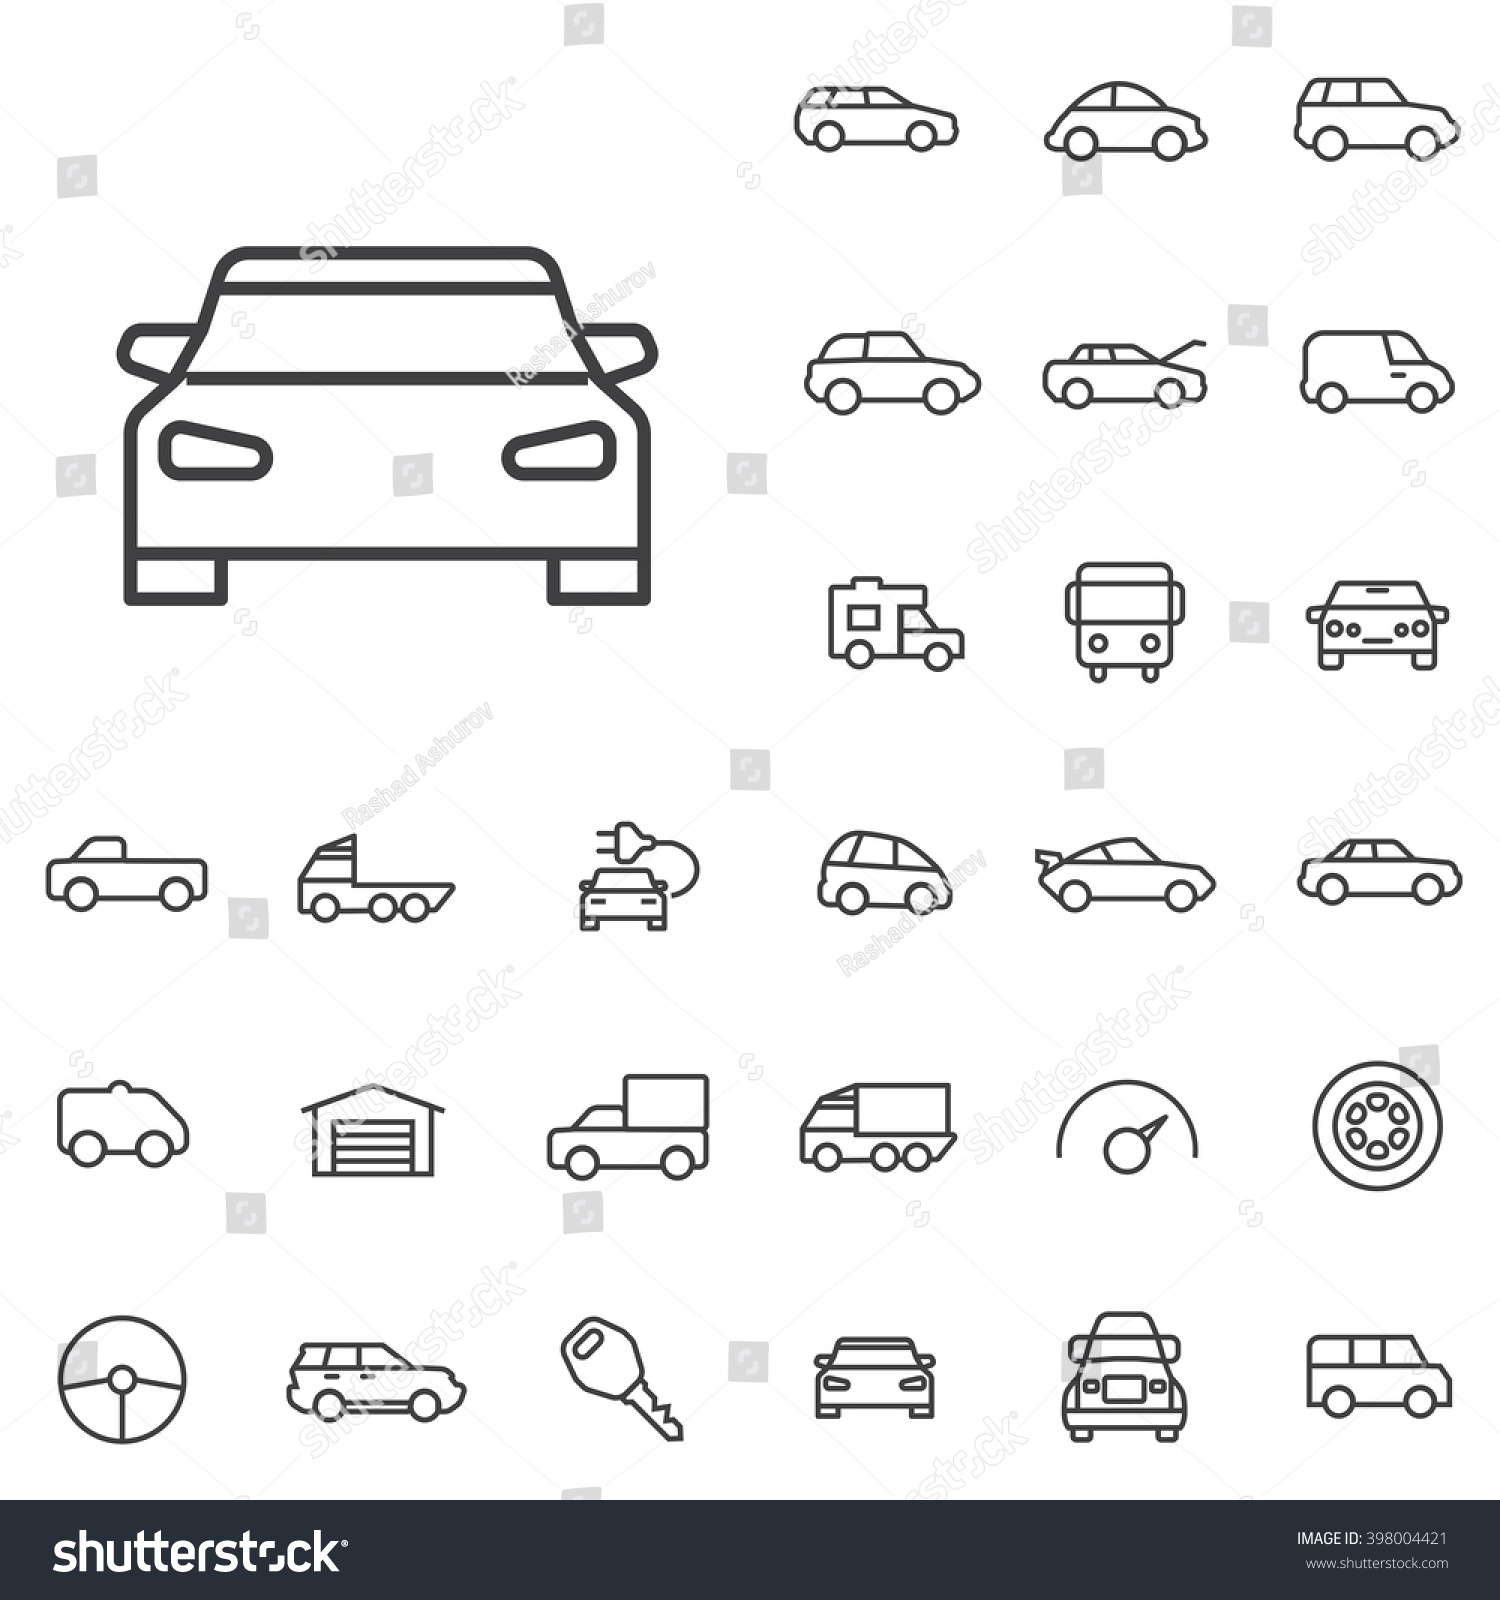 Linear car icons set. Universal car icon to use in web and mobile UI, car basic UI elements set #398004421